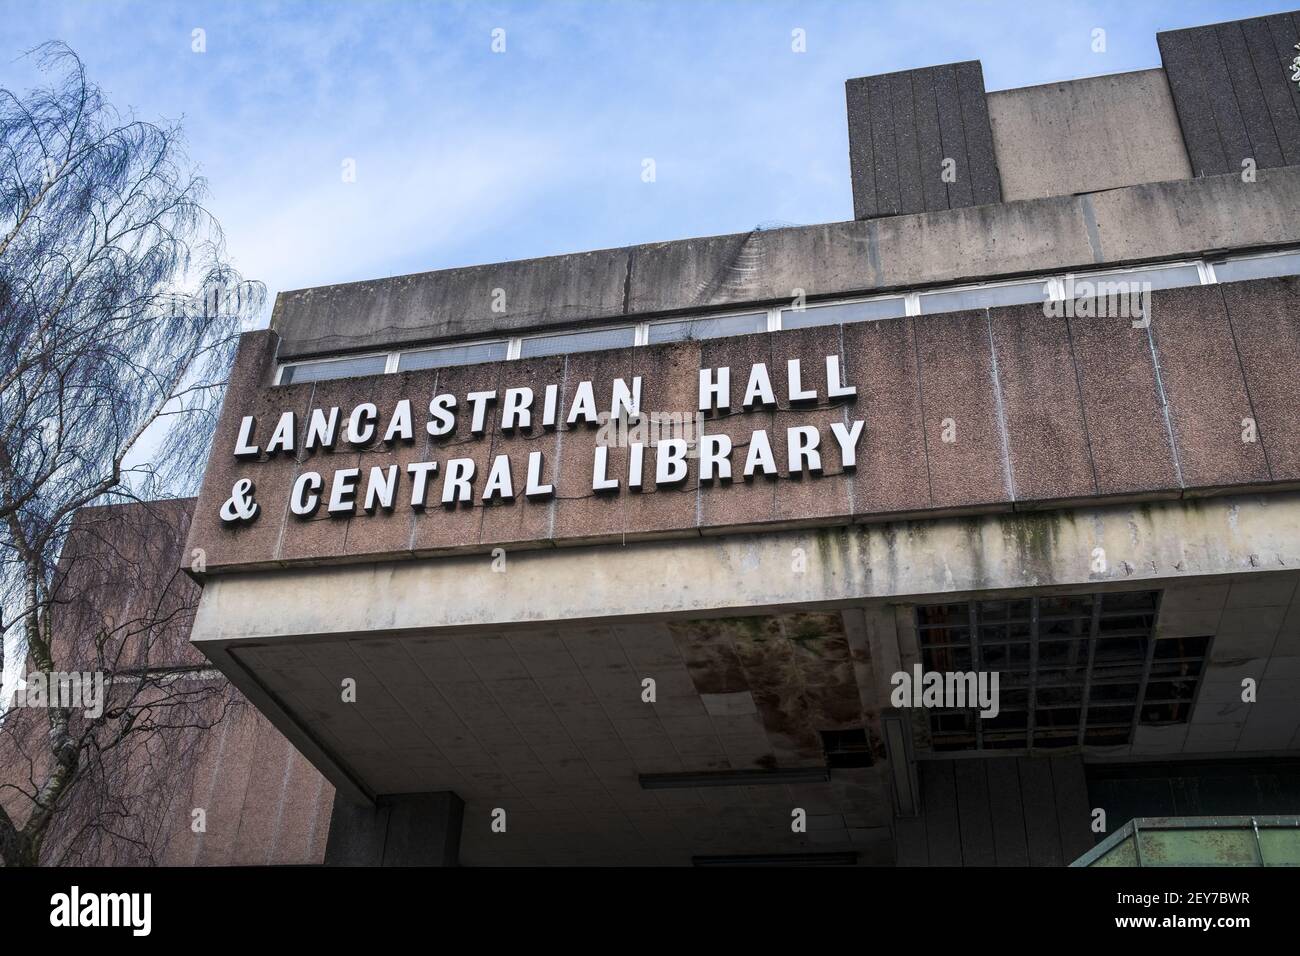 SWINTON, UNITED KINGDOM - Feb 13, 2021: Lancastrian hall and central library closed down and waiting to be demolished Stock Photo